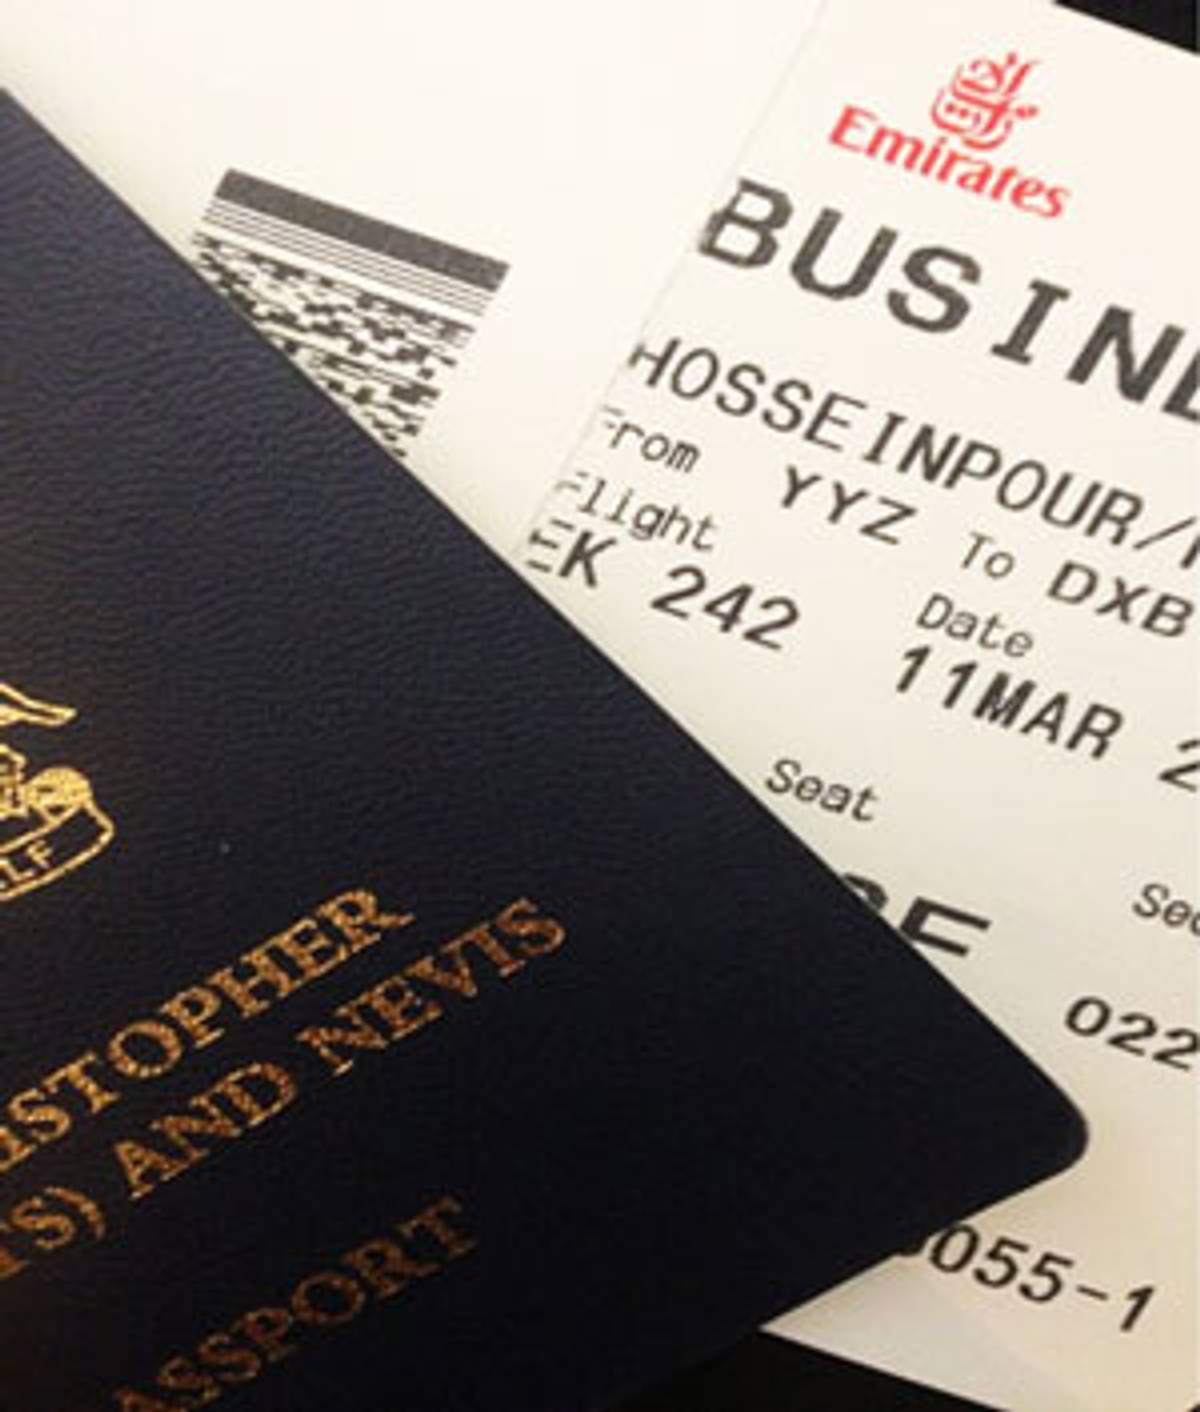 Tannaz Hosseinpour’s passport and boarding pass on 11 March 2013. (Via Twitter)